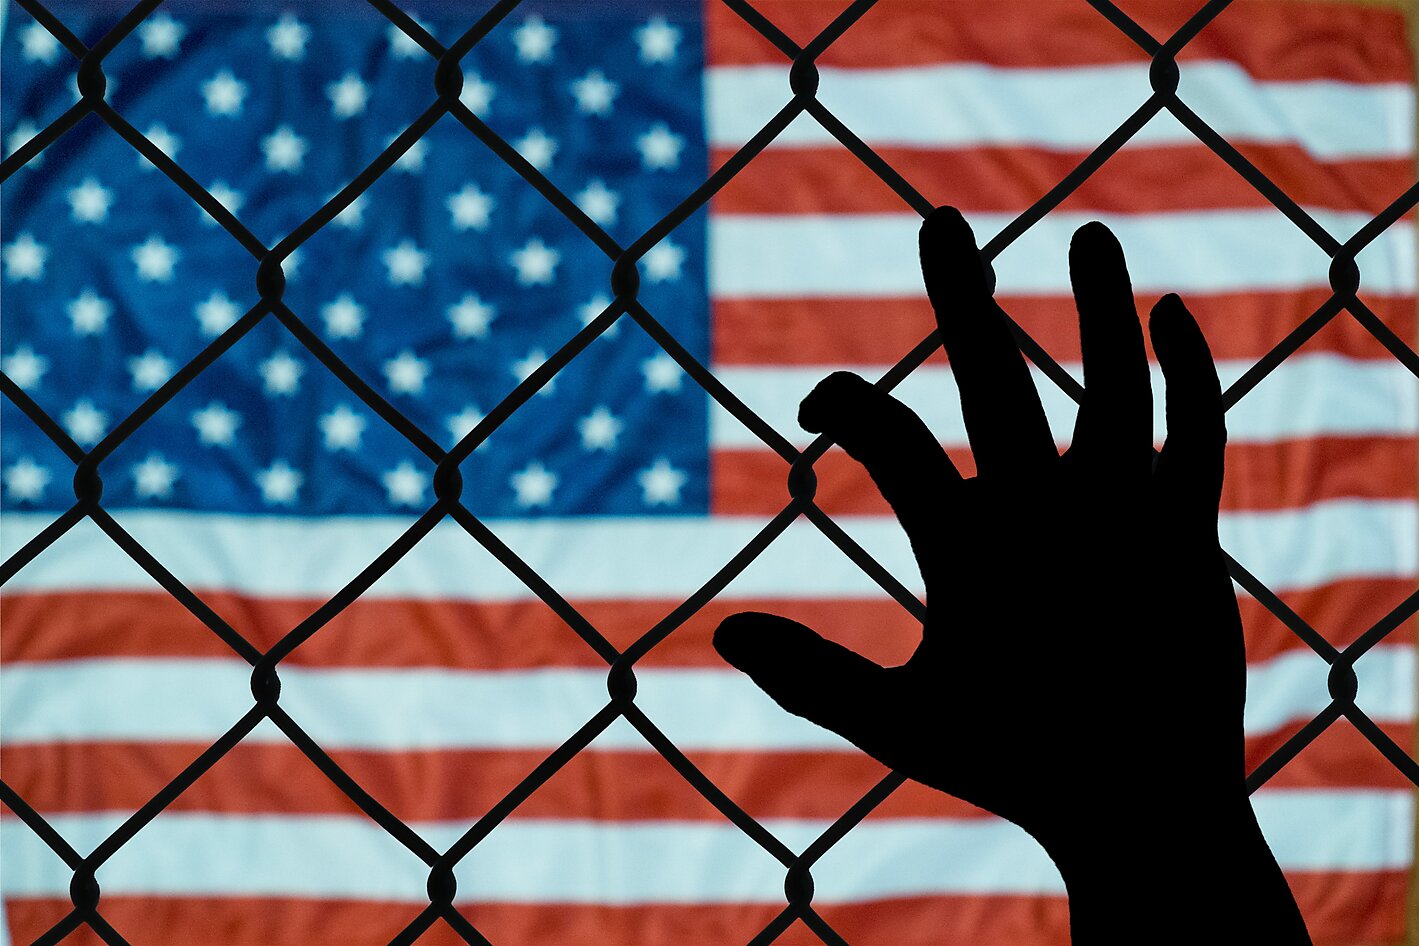 Hand holding a fence with American flag in the background